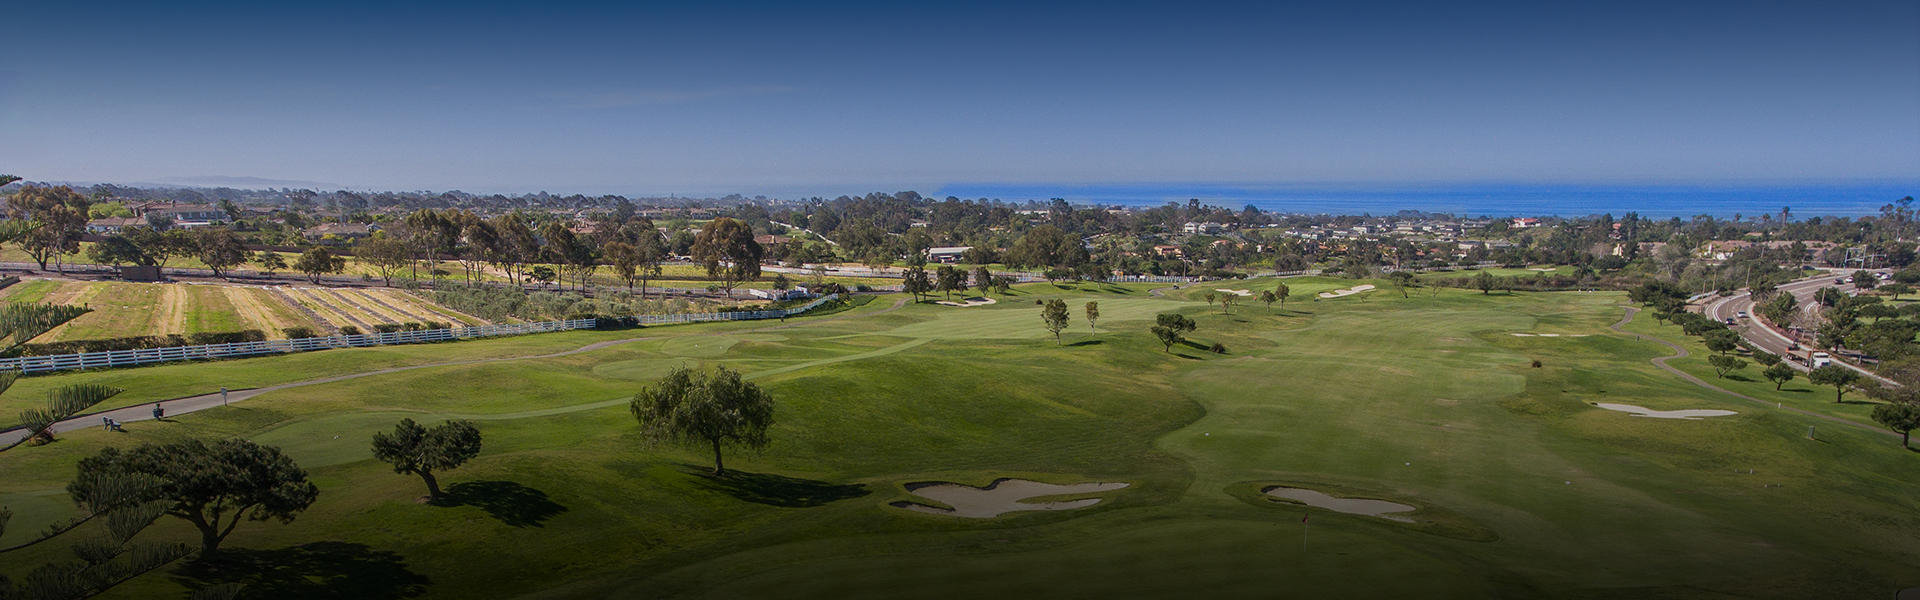 a panoramic view of the golf course with a view of the ocean in the far distance